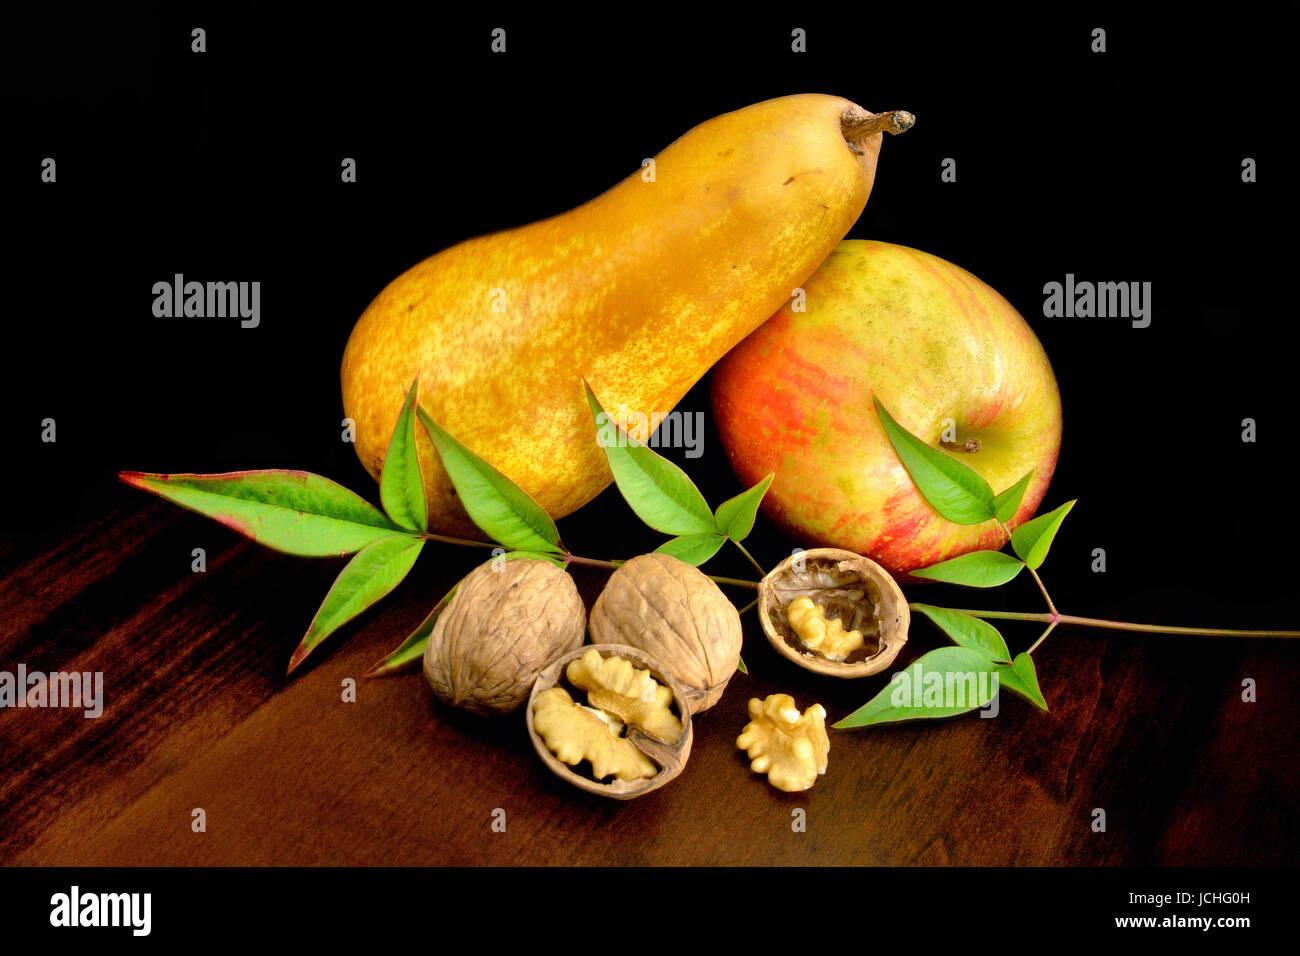 still life composition with fruit in season on black background Stock Photo